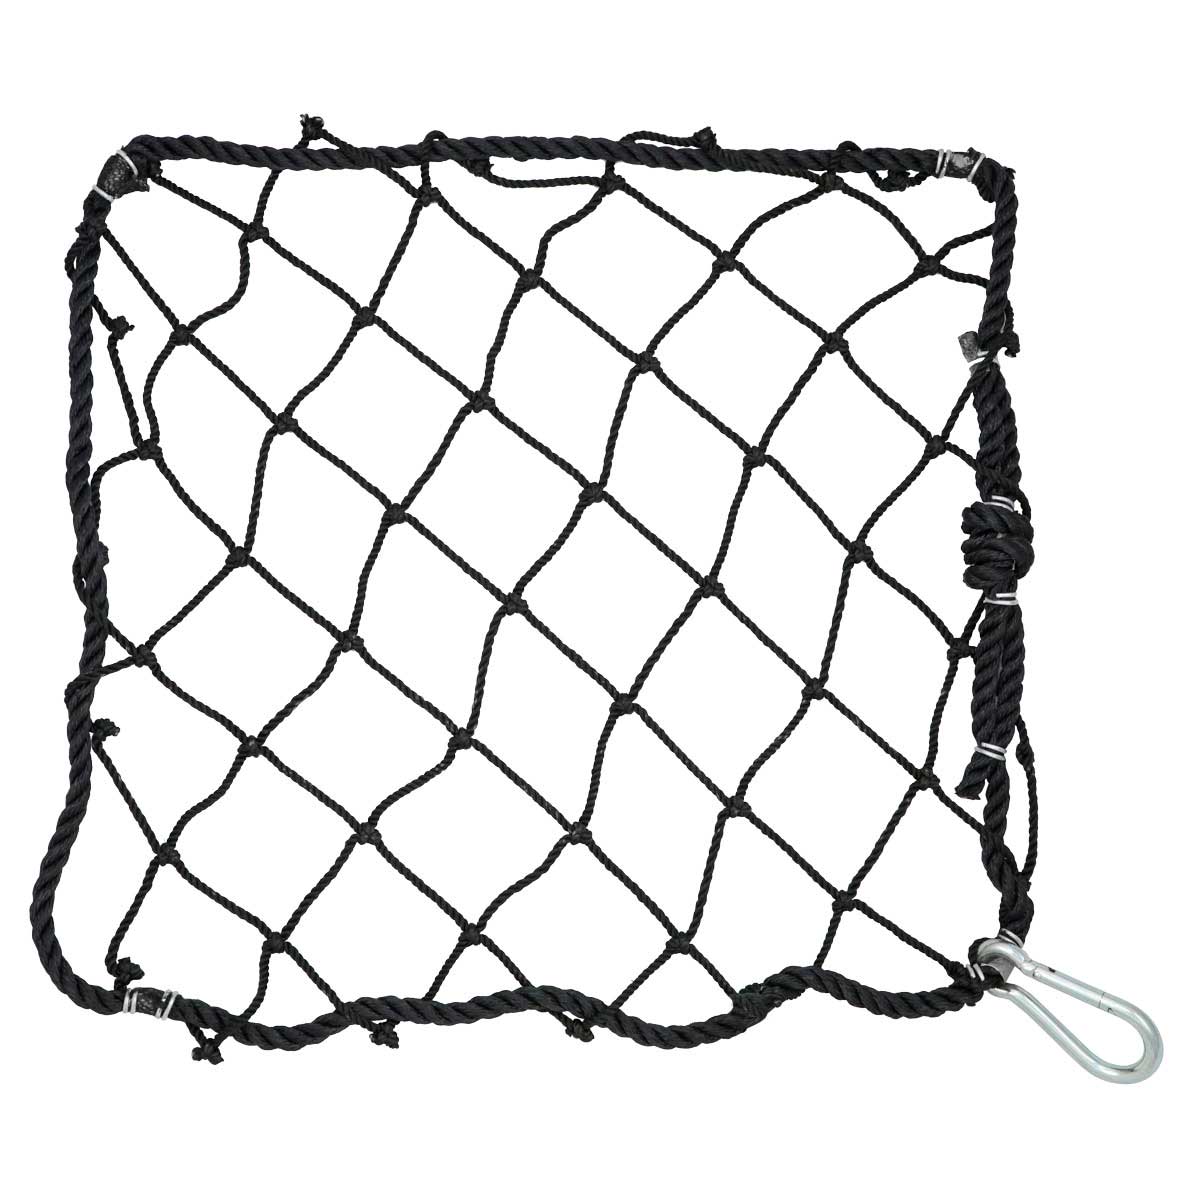 Personnel Safety Net - 30' x 40'